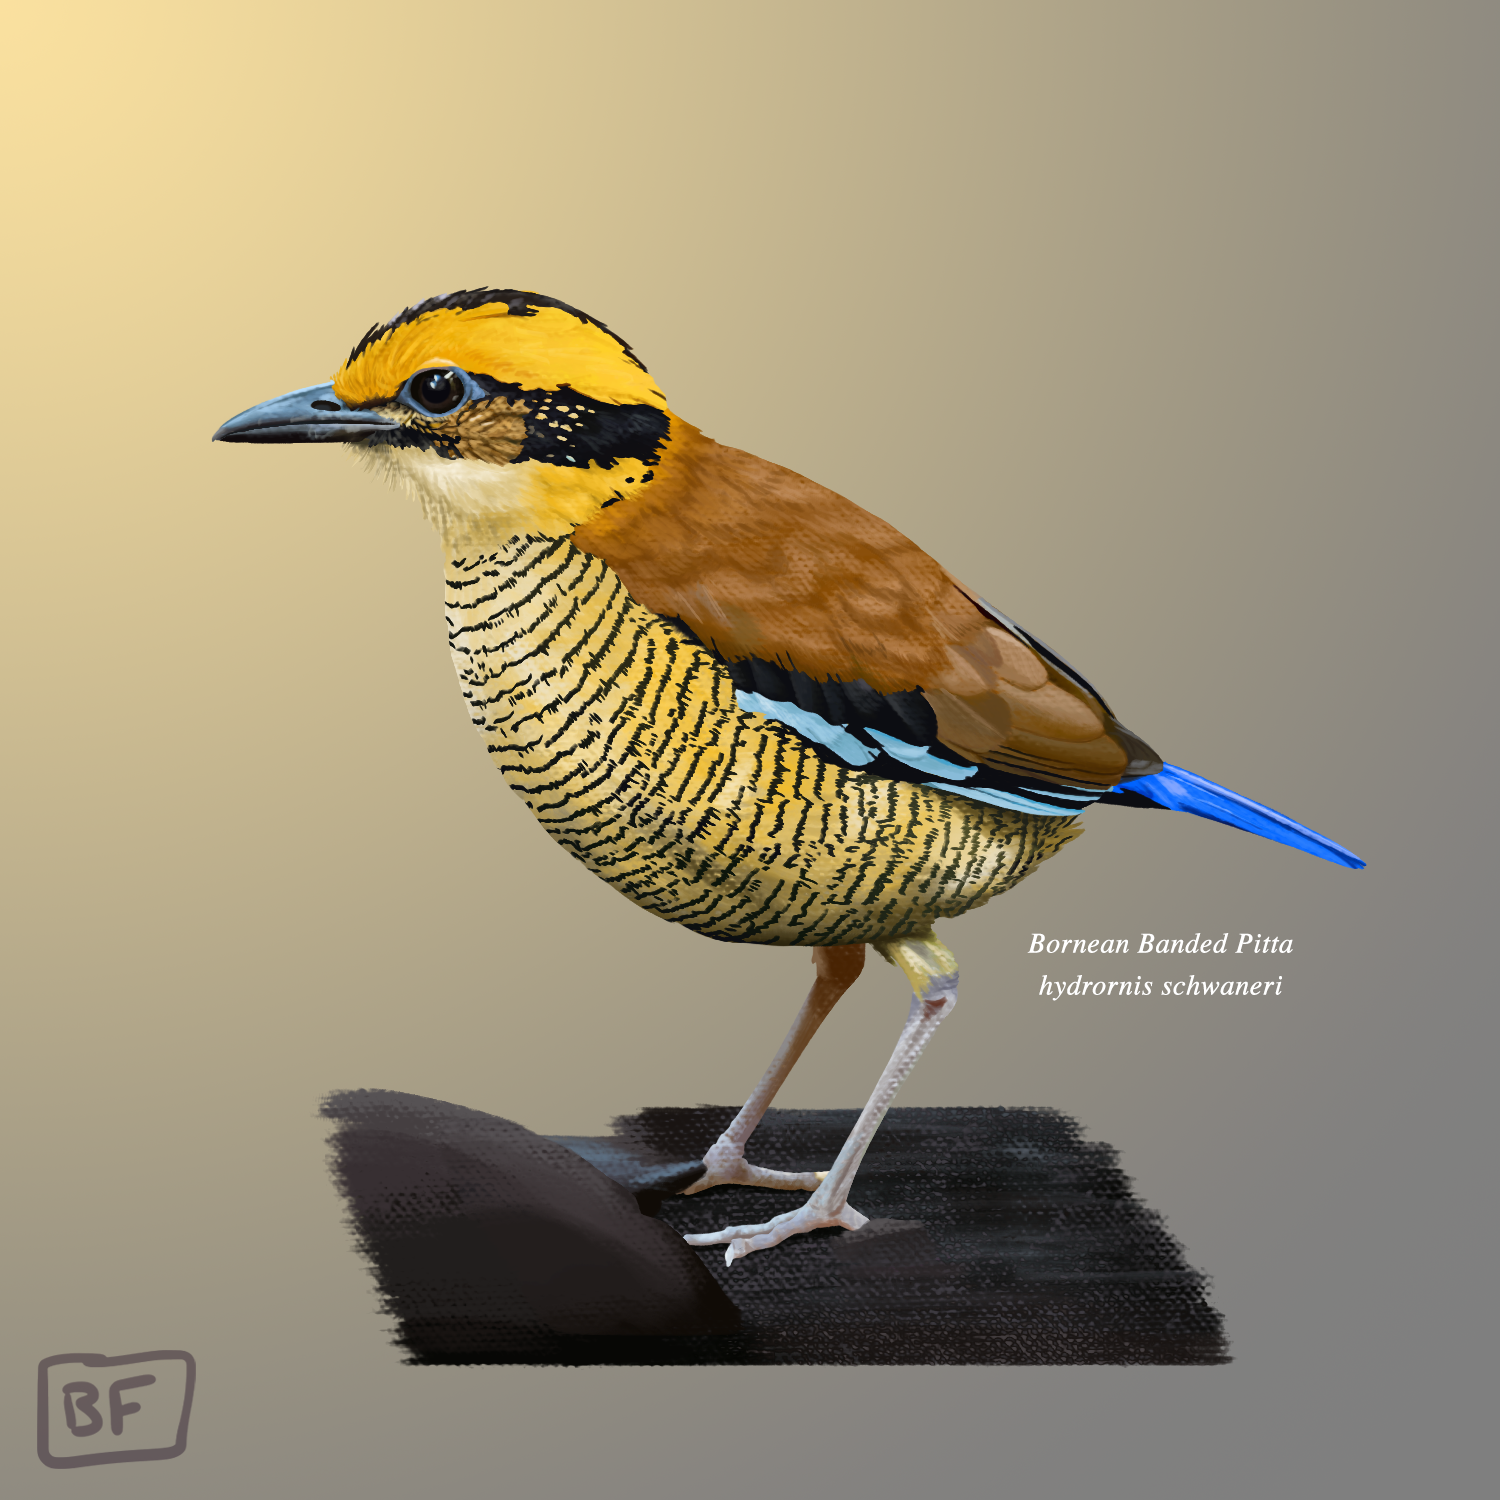 2.Bornean Banded Pitta.png